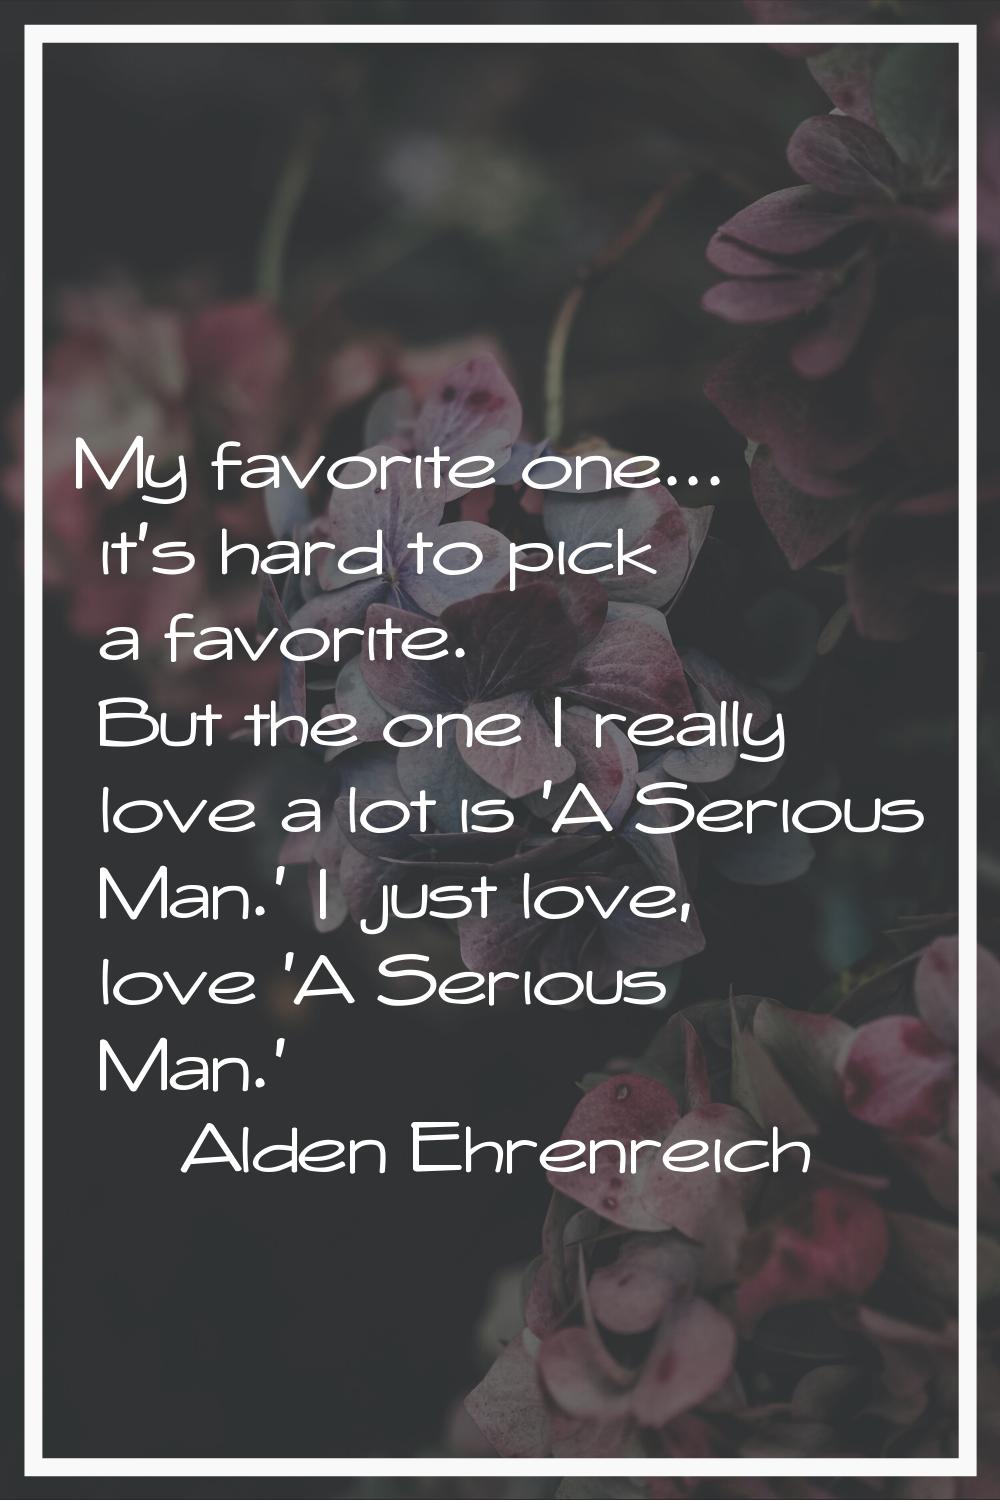 My favorite one... it's hard to pick a favorite. But the one I really love a lot is 'A Serious Man.